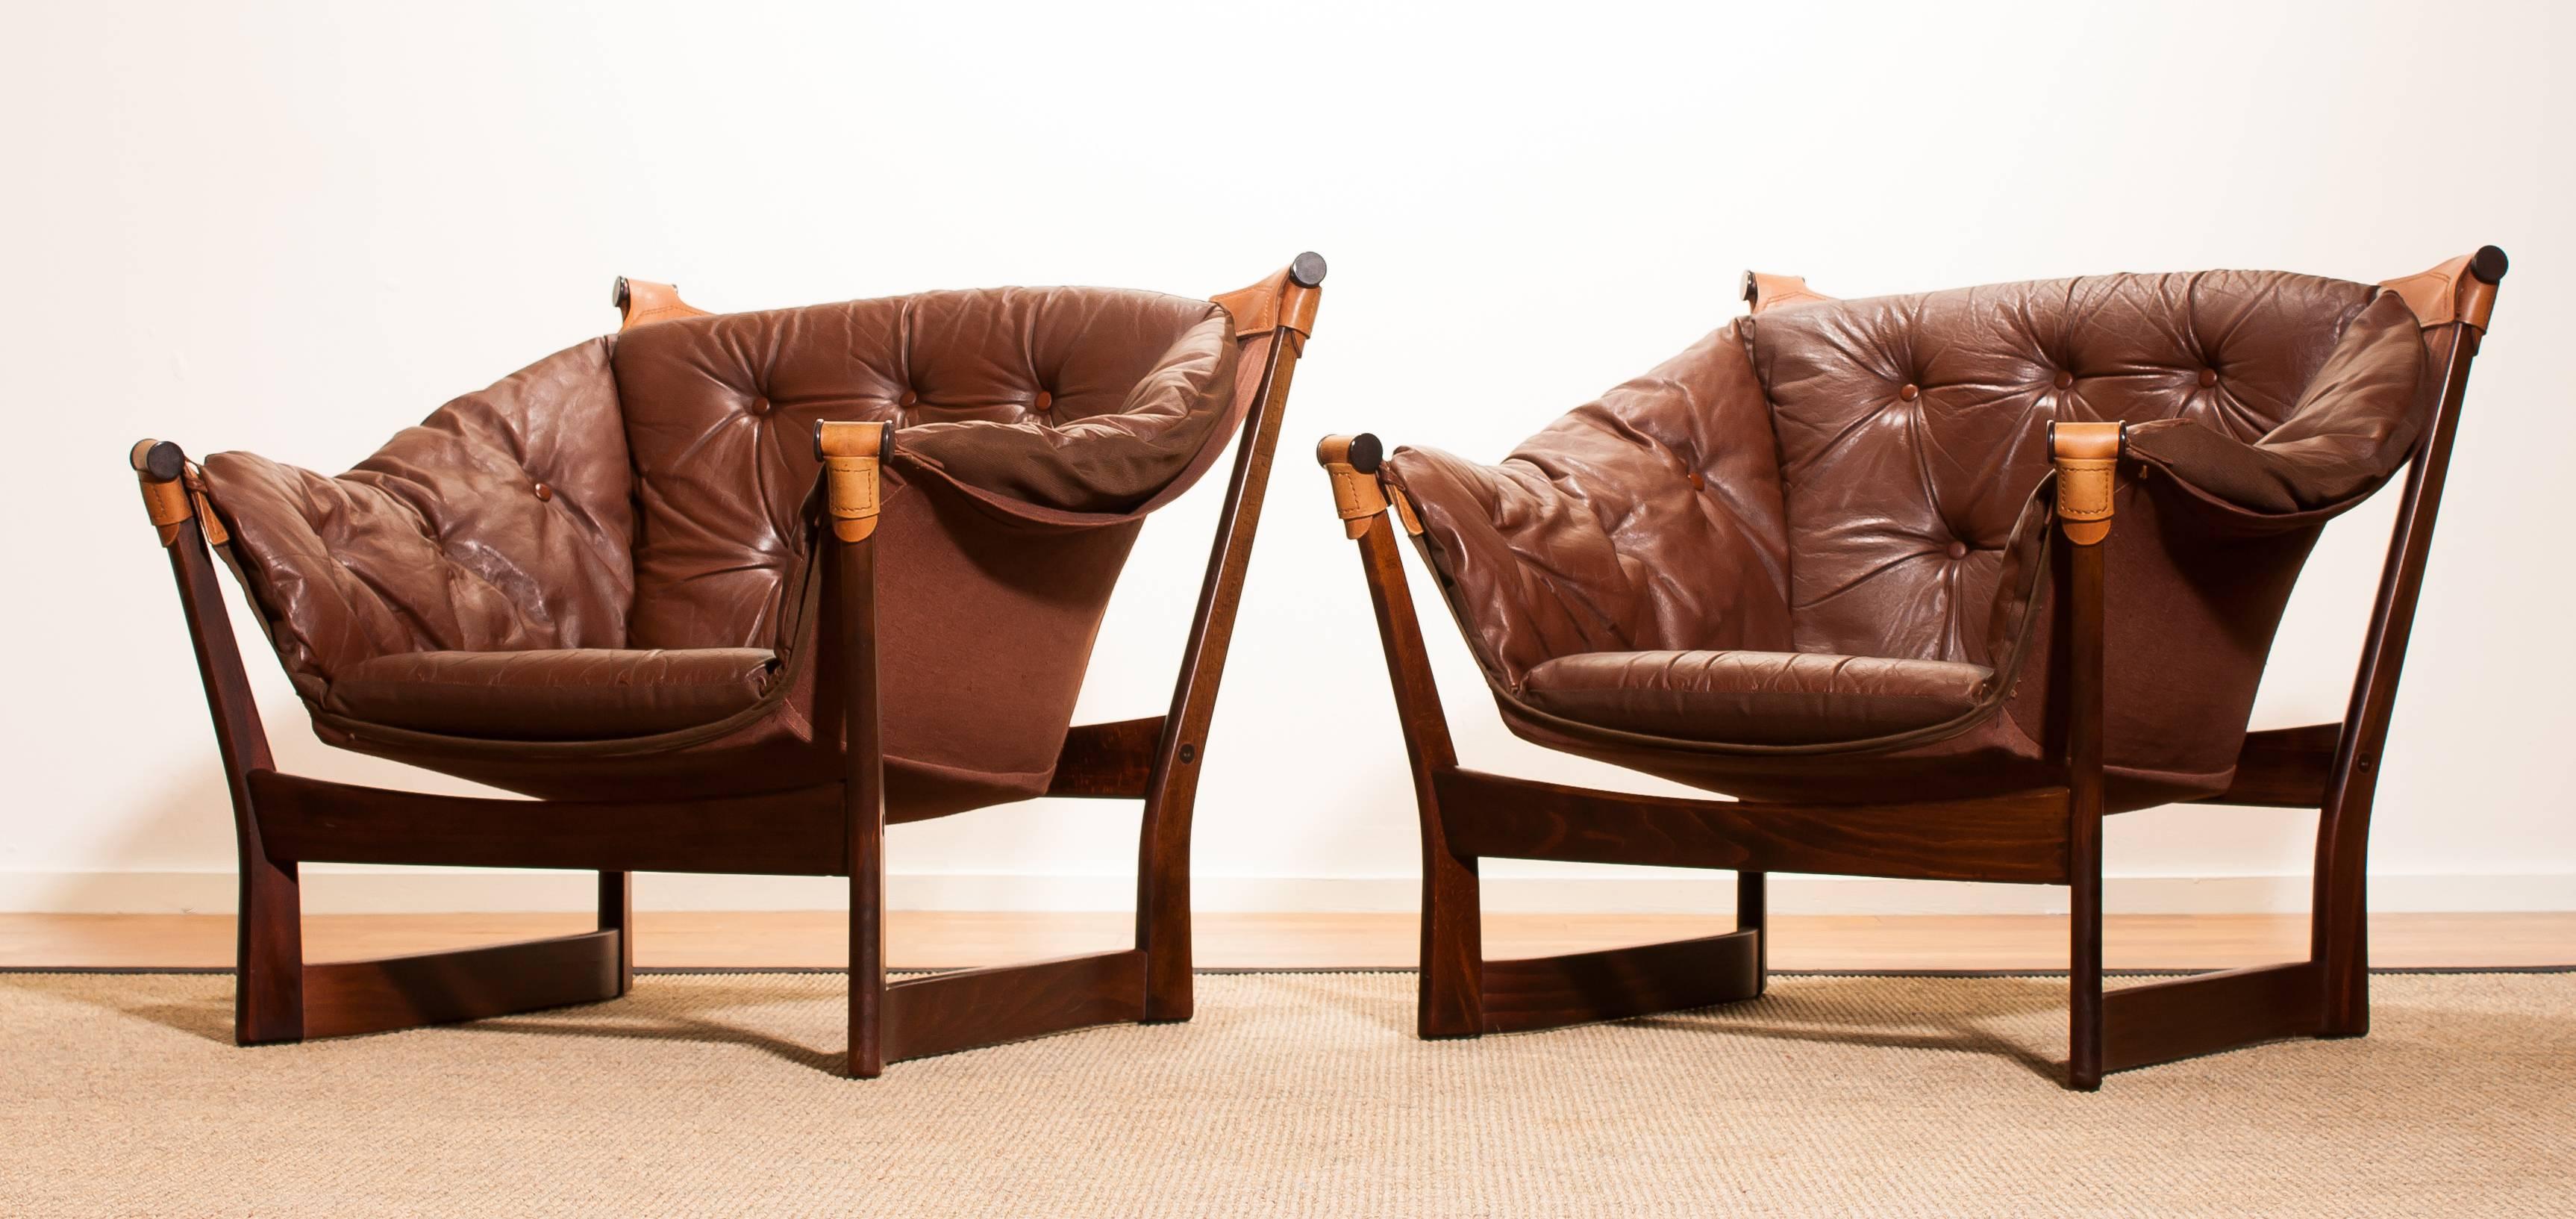 1950s, Teak and Leather Pair 'Trega' Chairs by Tormod Alnaes for Sørliemøbler 6